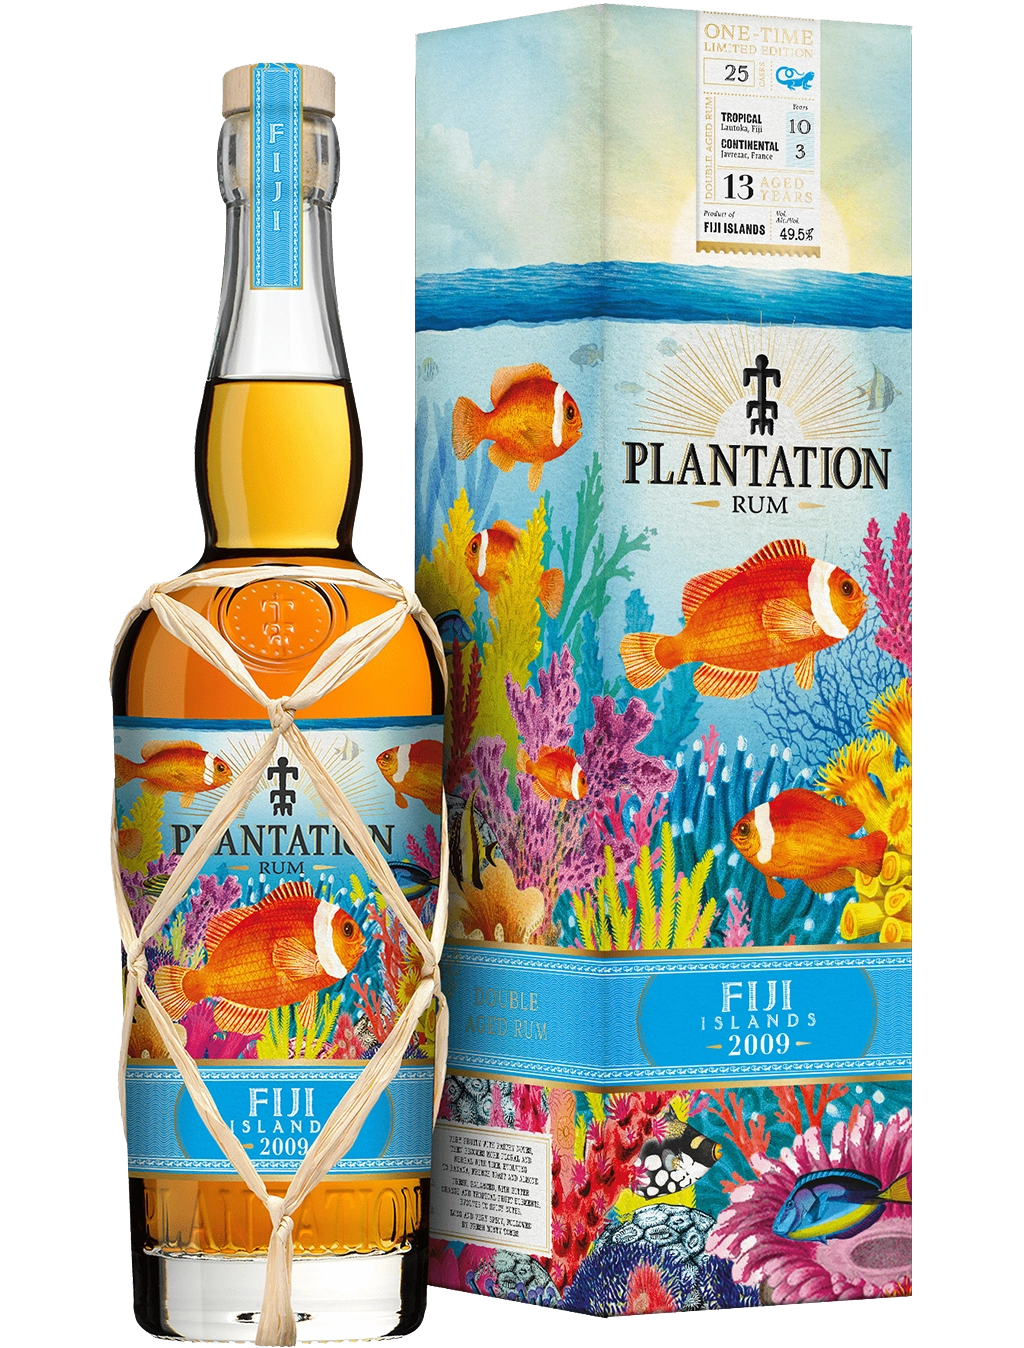 PLANTATION RUM DOUBLE AGED IN TROPICAL & CONTINENTAL FIJI 13YR 750ML